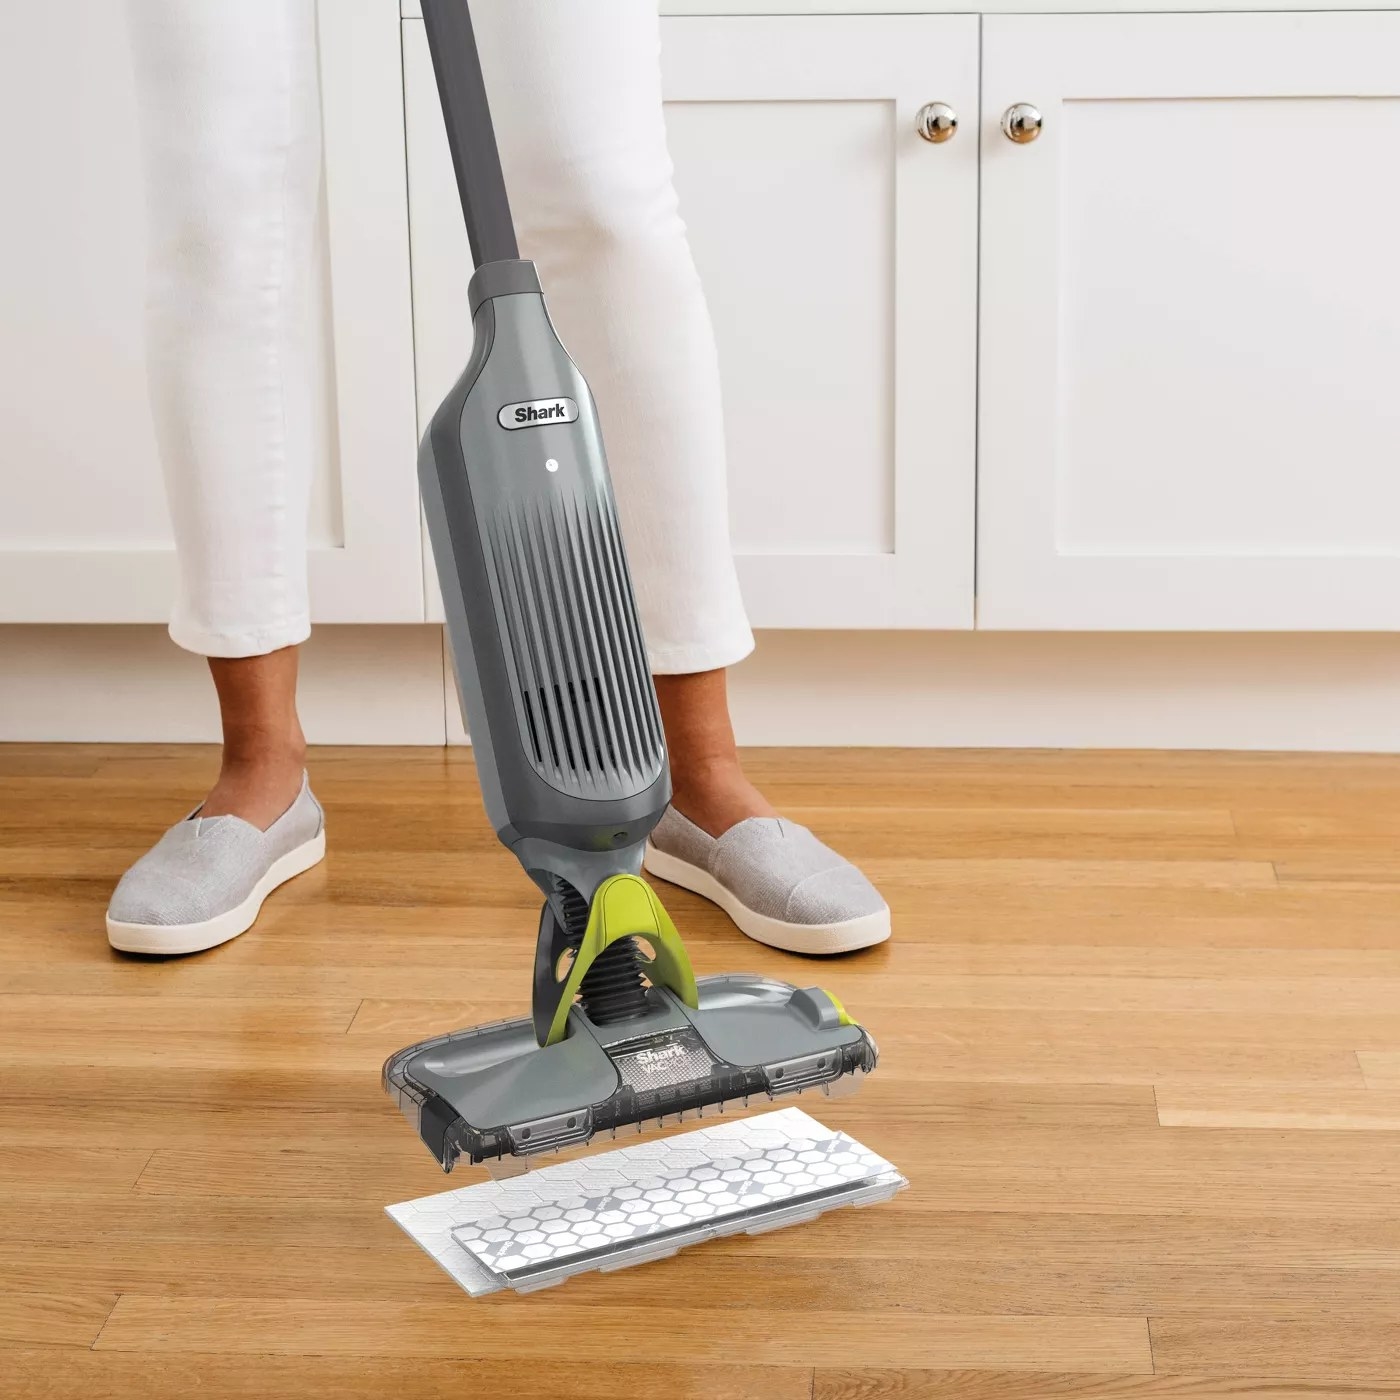 The Shark vacuum mop and the detachable pad